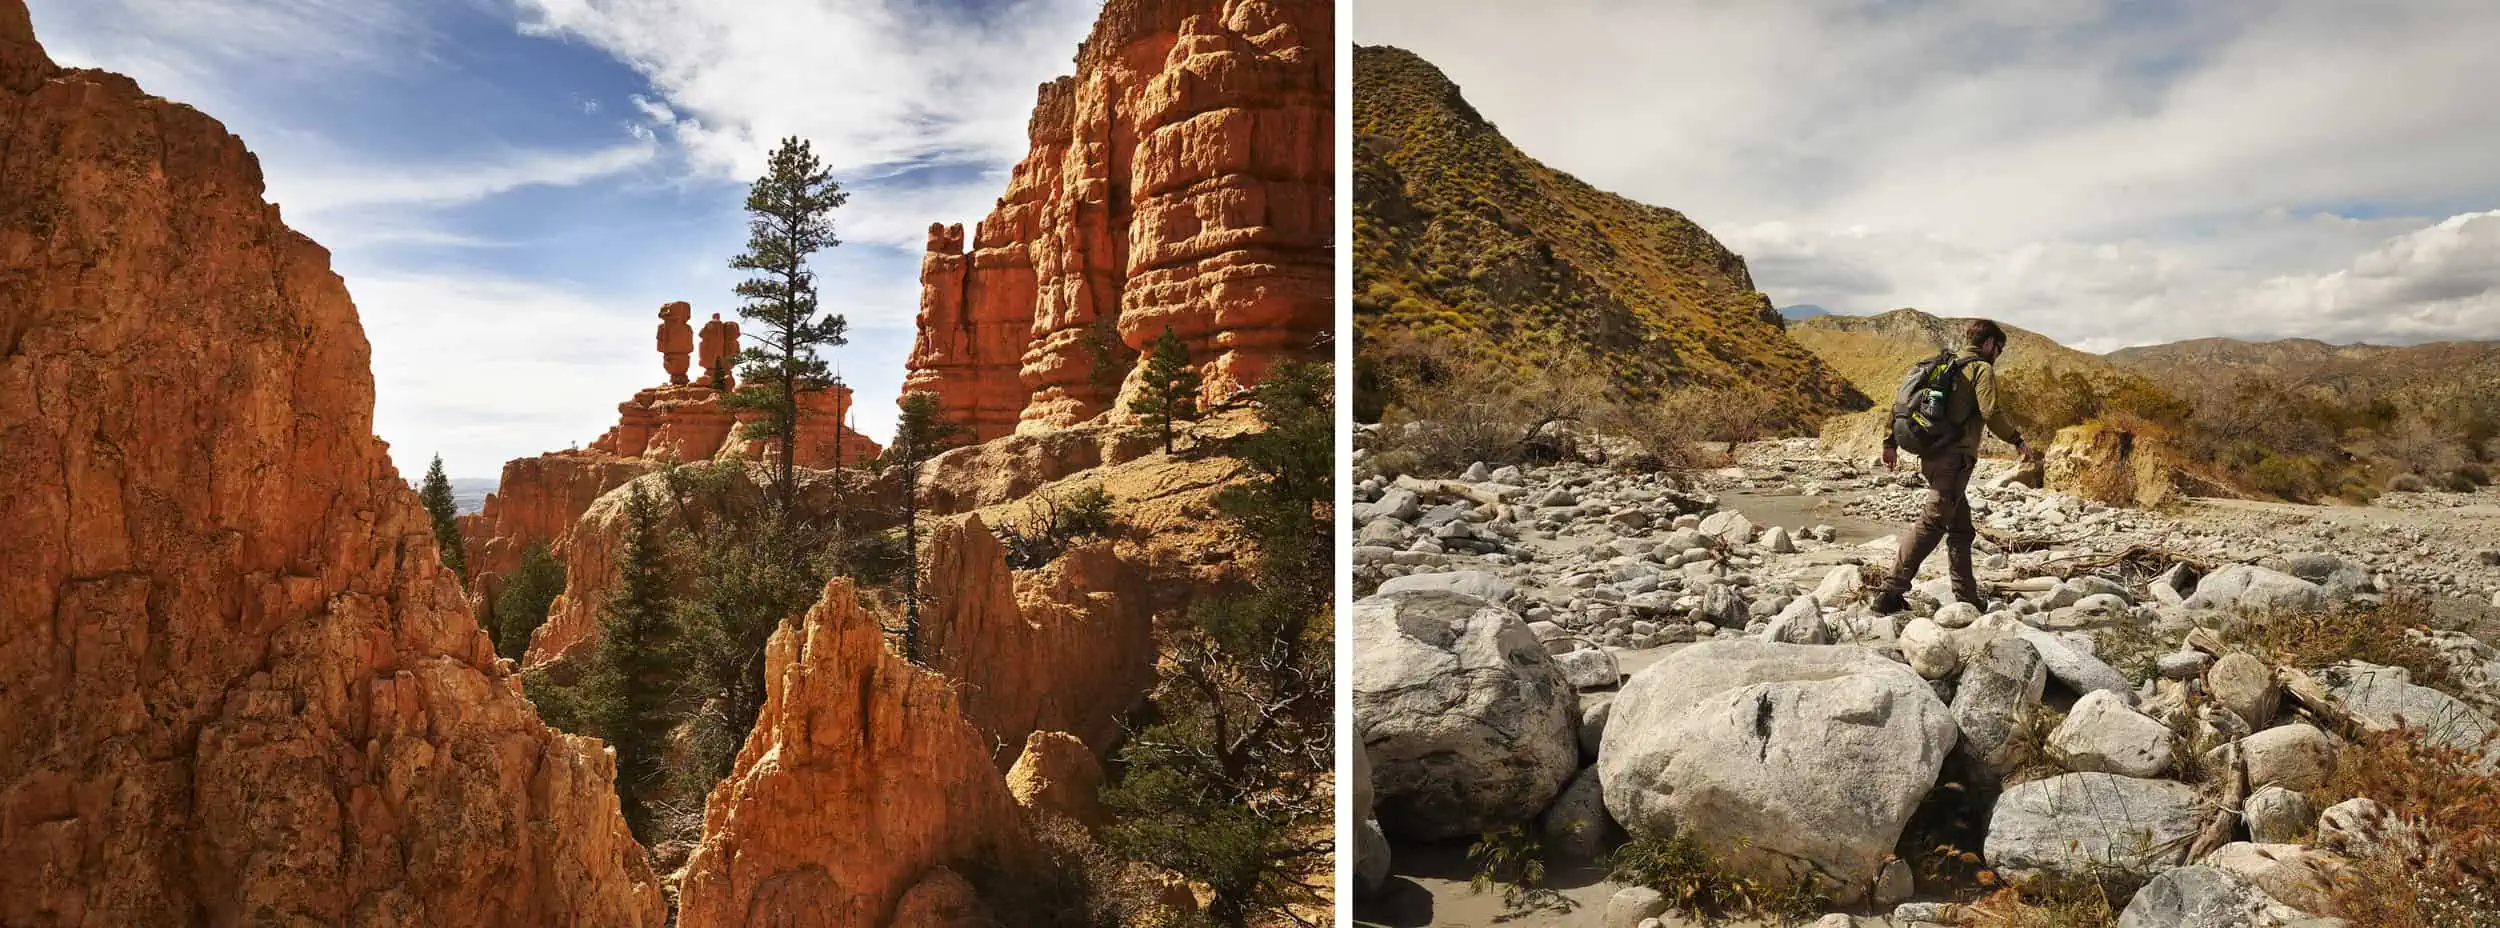 Left: Red Canyon, Utah Right: Sand to Snow National Monument, California